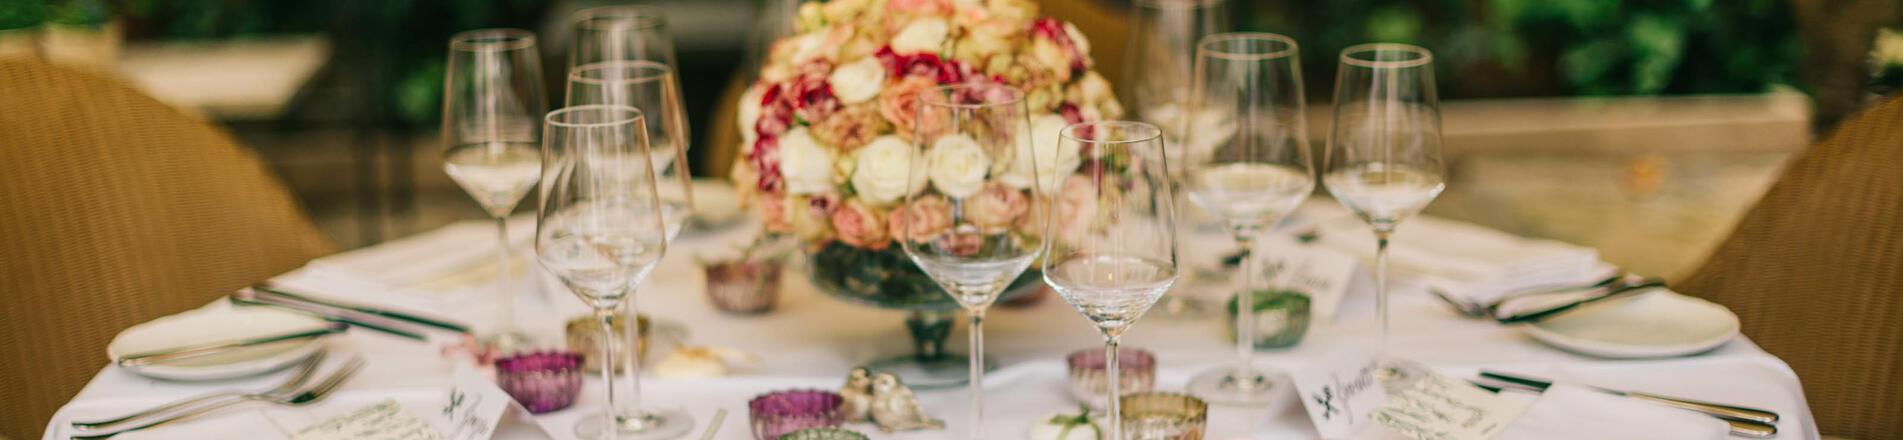 The benefits of a small wedding: why you should consider having a small wedding instead of a wedding for the whole world! 